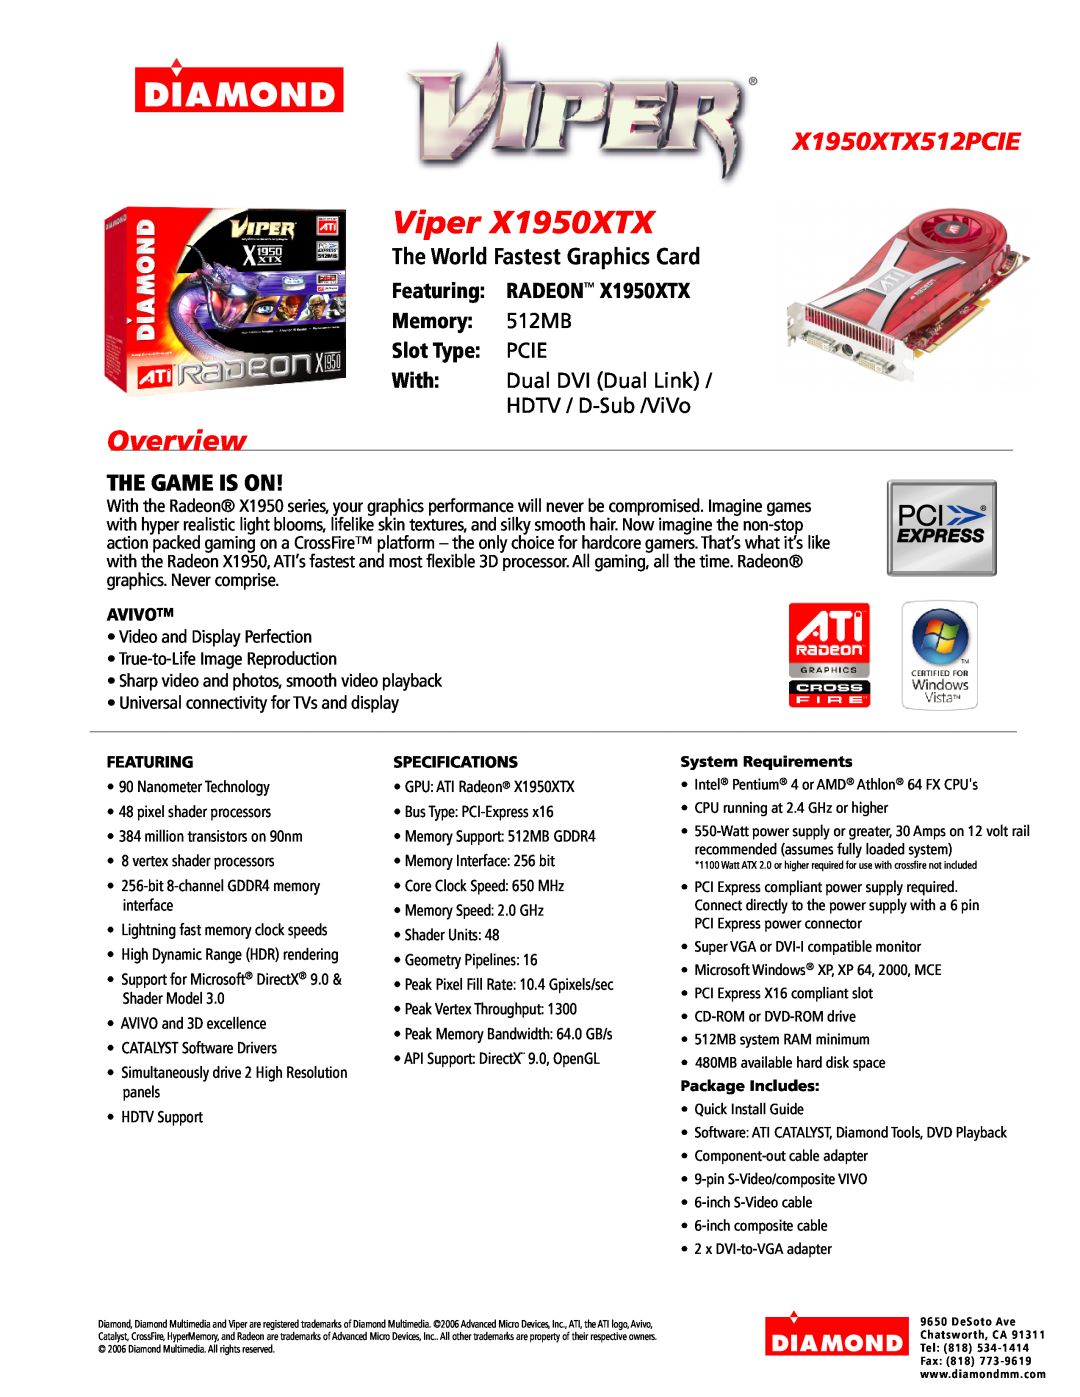 Diamond Multimedia specifications Viper X1950XTX, Overview, X1950XTX512PCIE, The World Fastest Graphics Card, Featuring 